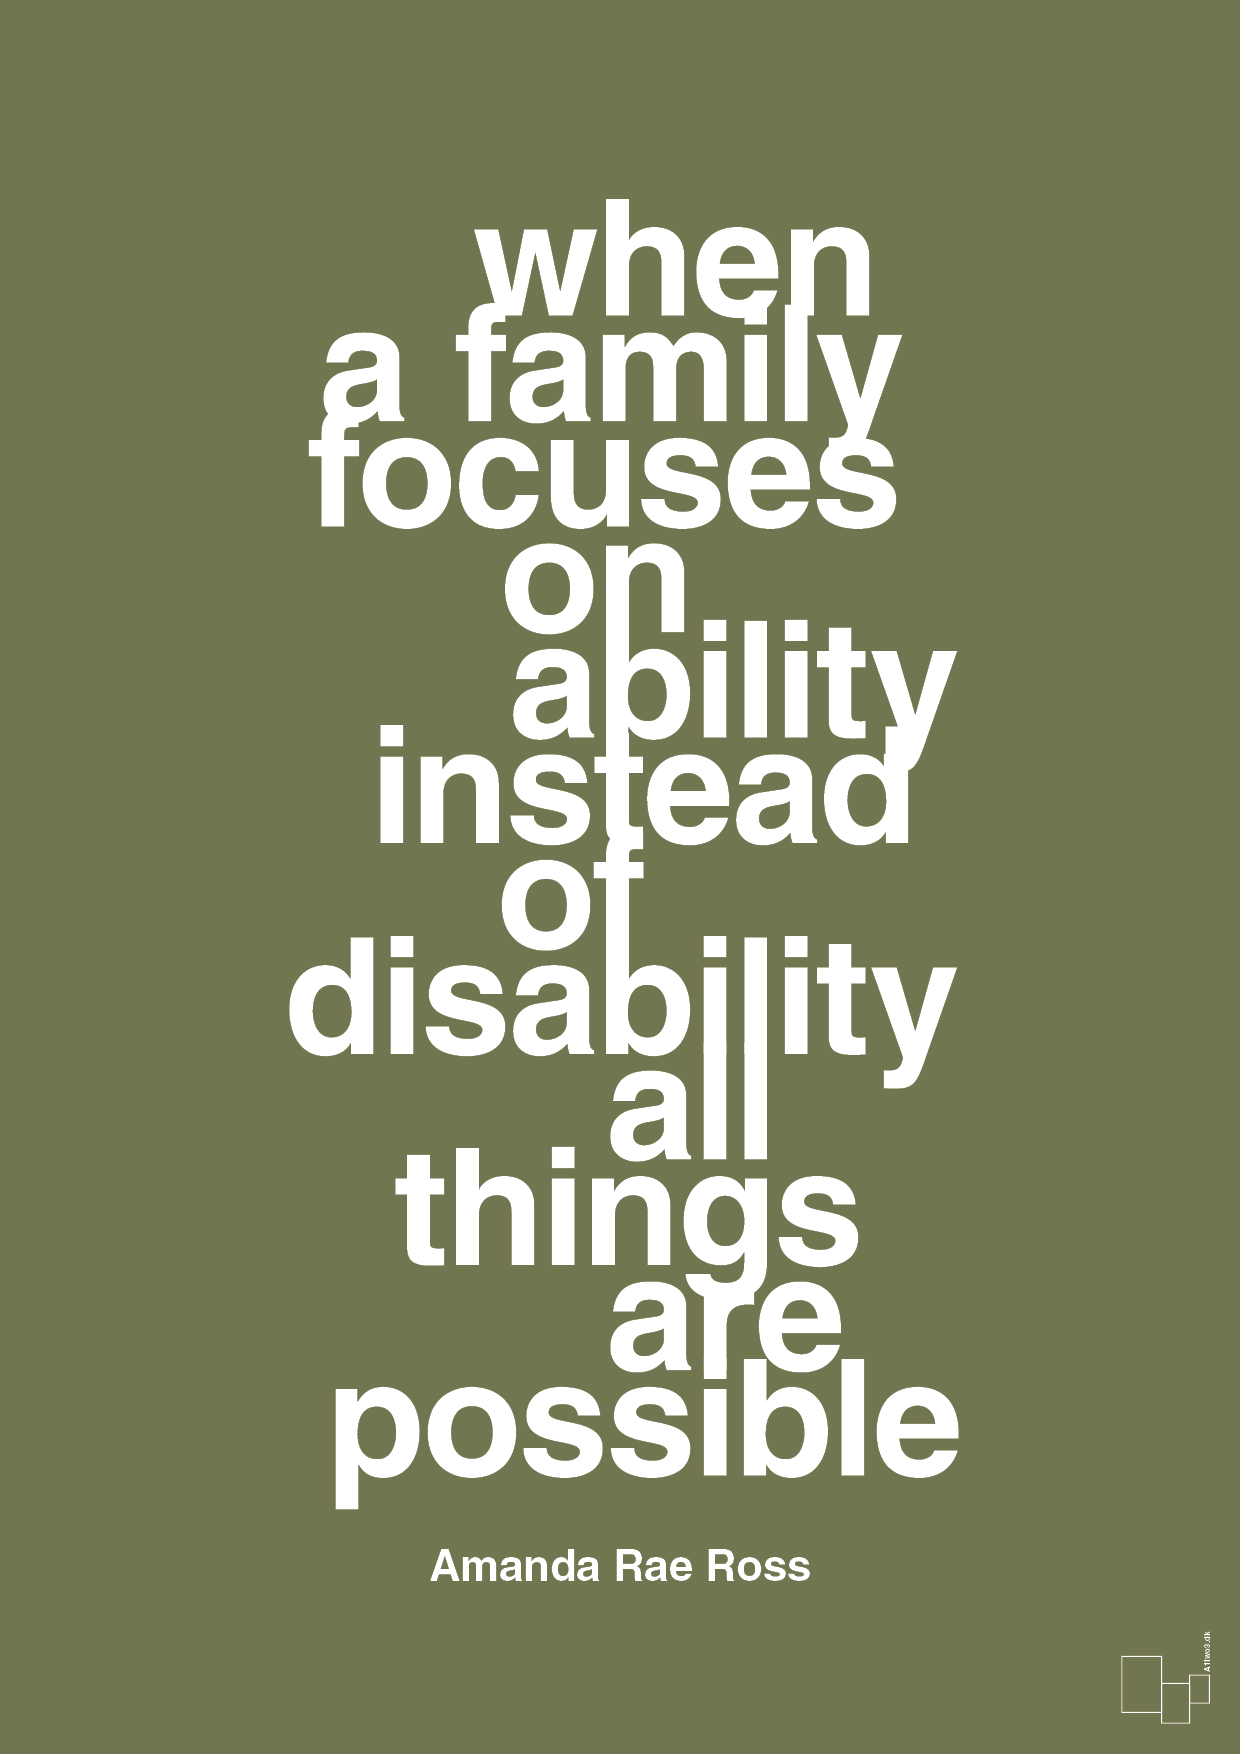 when a family focuses on ability instead of disability all things are possible - Plakat med Samfund i Secret Meadow